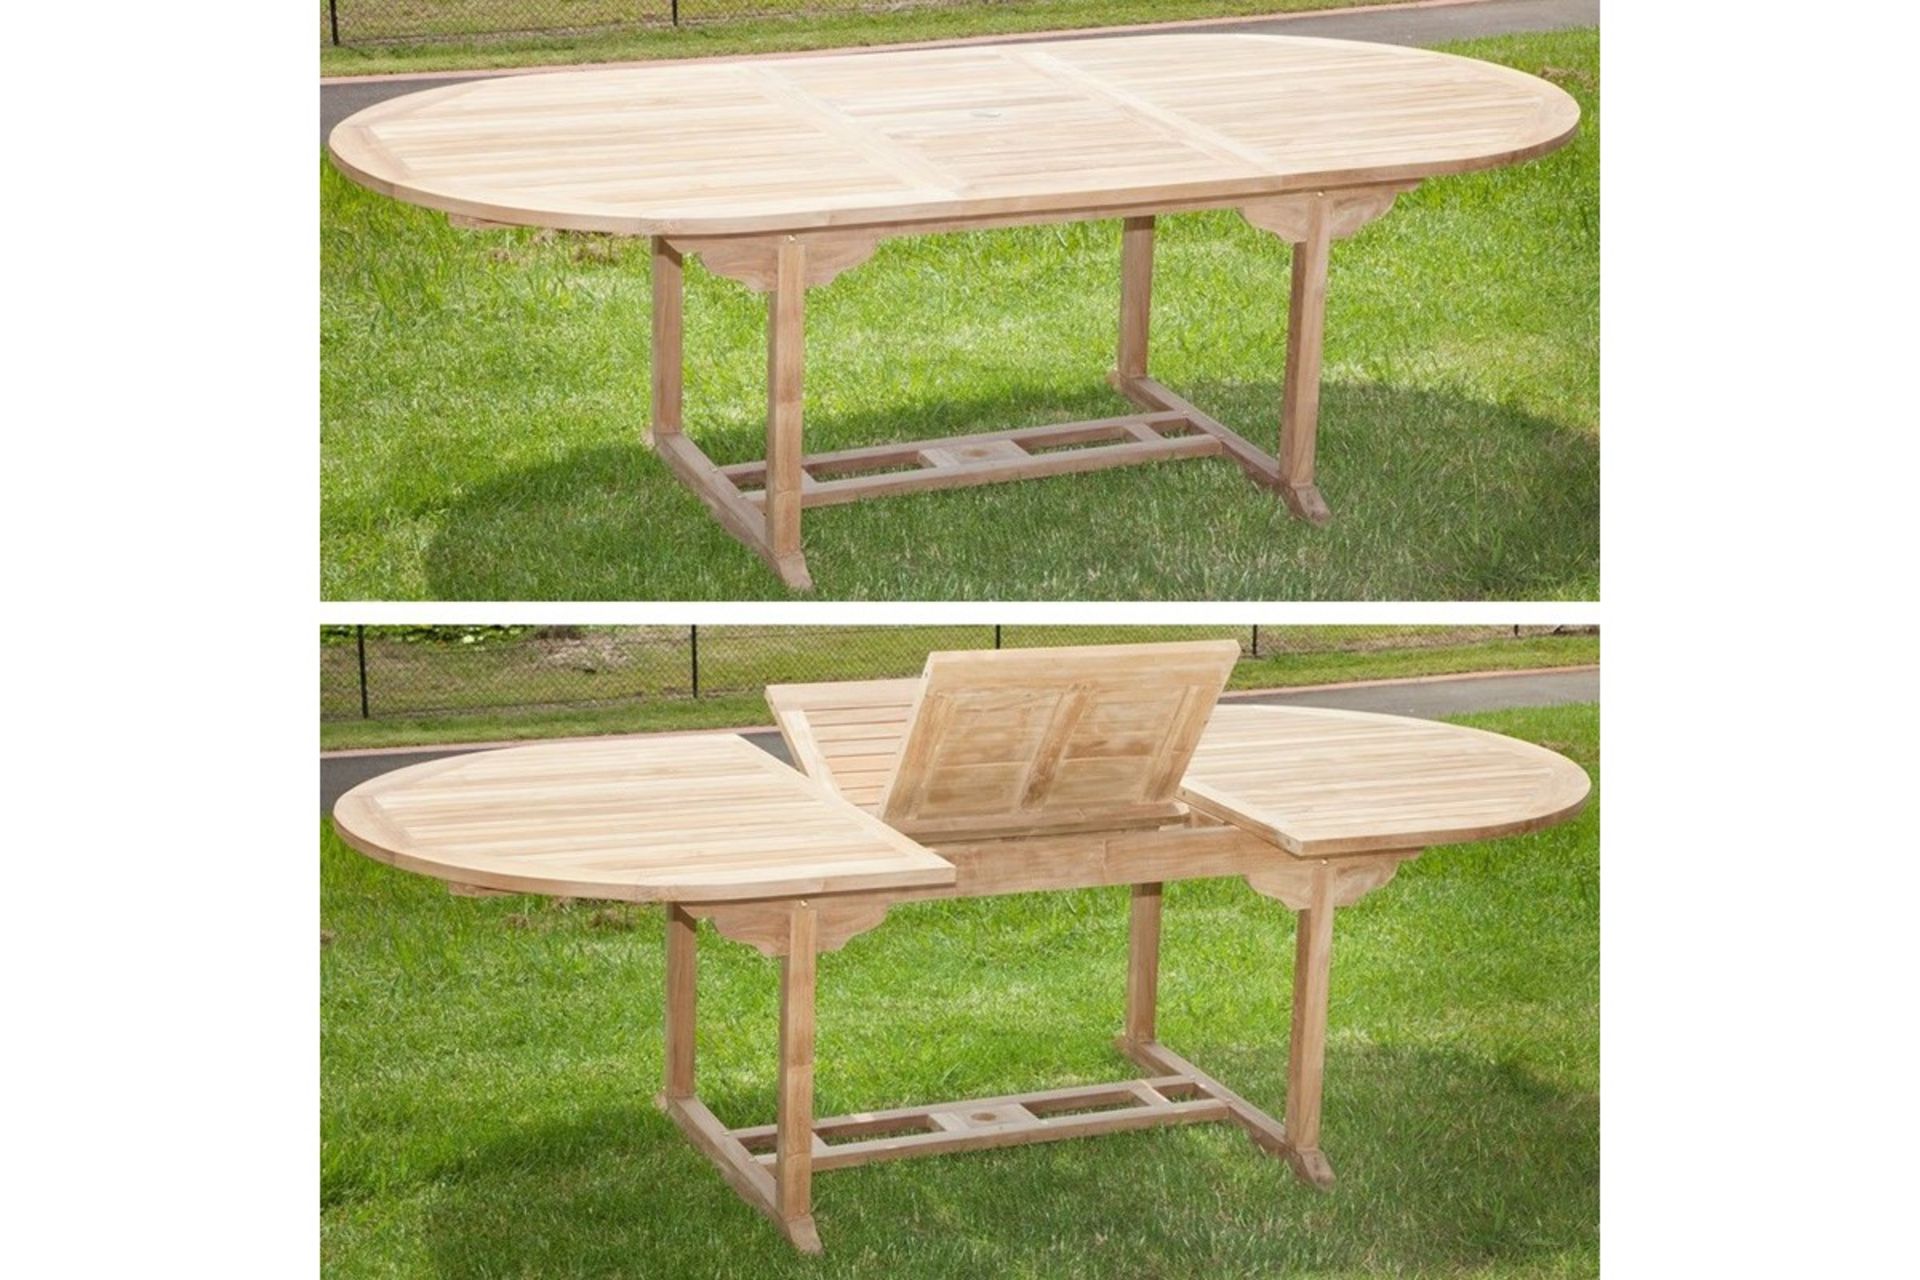 V Brand New Teak Extended Oval Table Set Allows For Up To 8 People including 8 stacking chairs / - Image 2 of 2